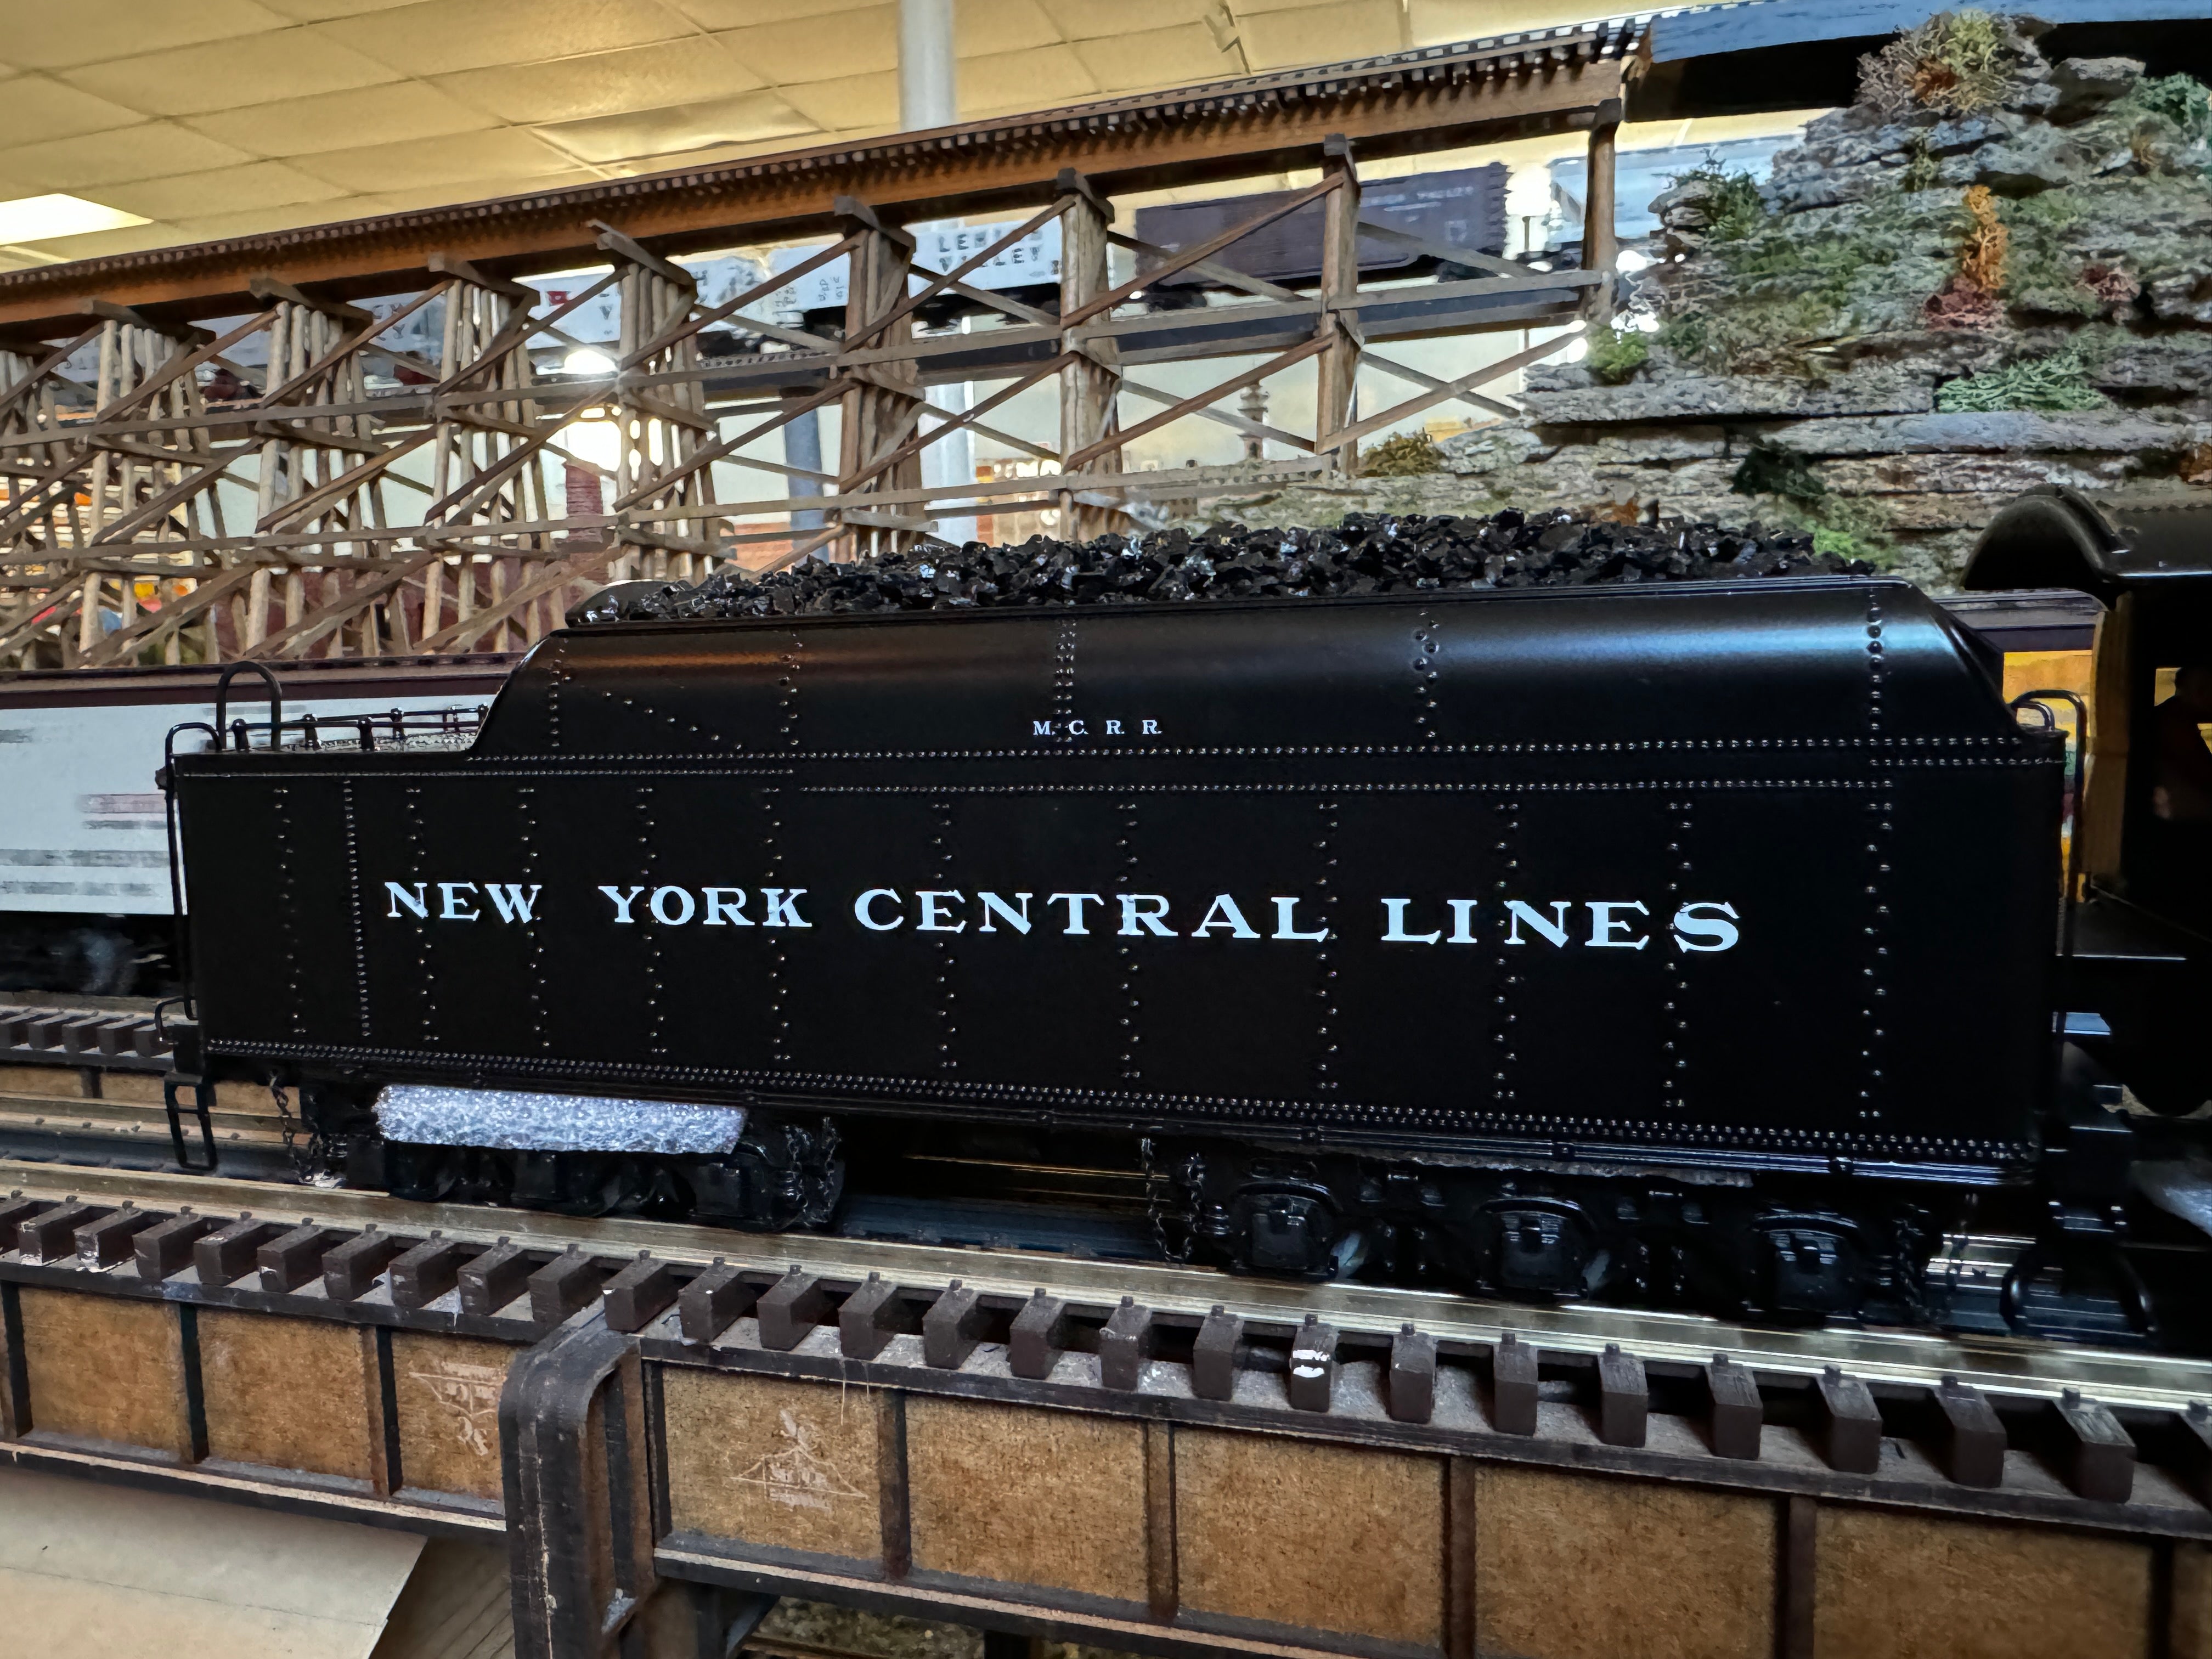 MTH 20-3866-1 - 4-6-4 J-1e Hudson Steam Engine "New York Central Lines" #8229 w/ PS3 (Michigan Central)